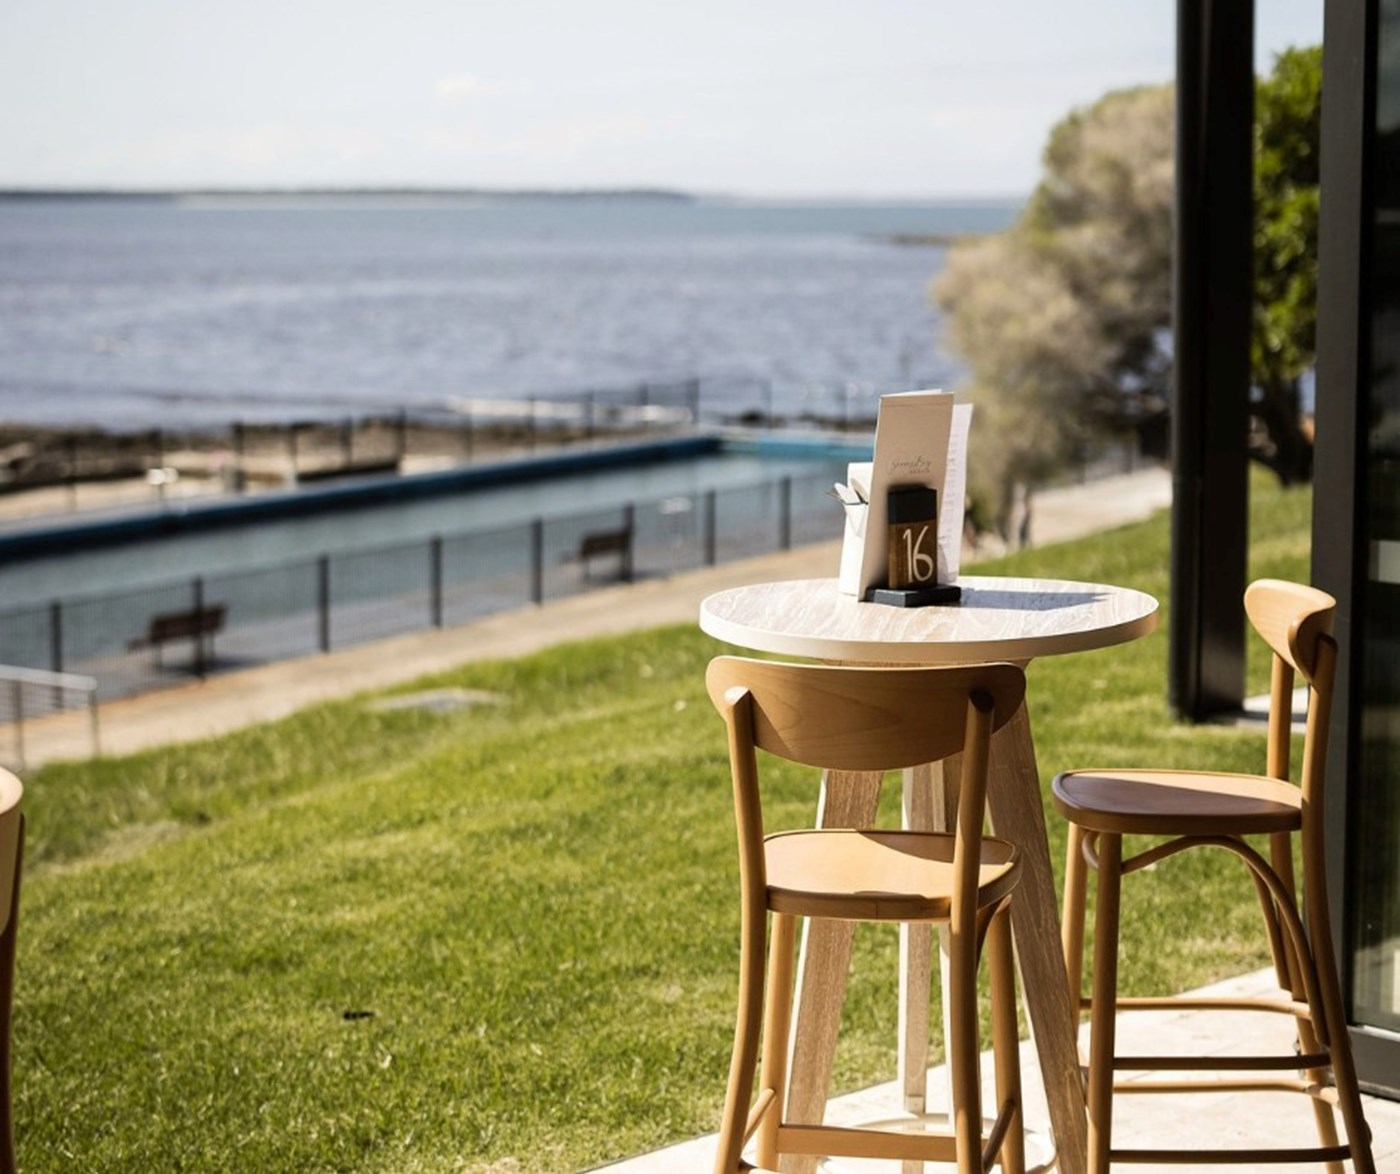 A single table with two chairs overlooking a swathe of grass and an ocean pool 